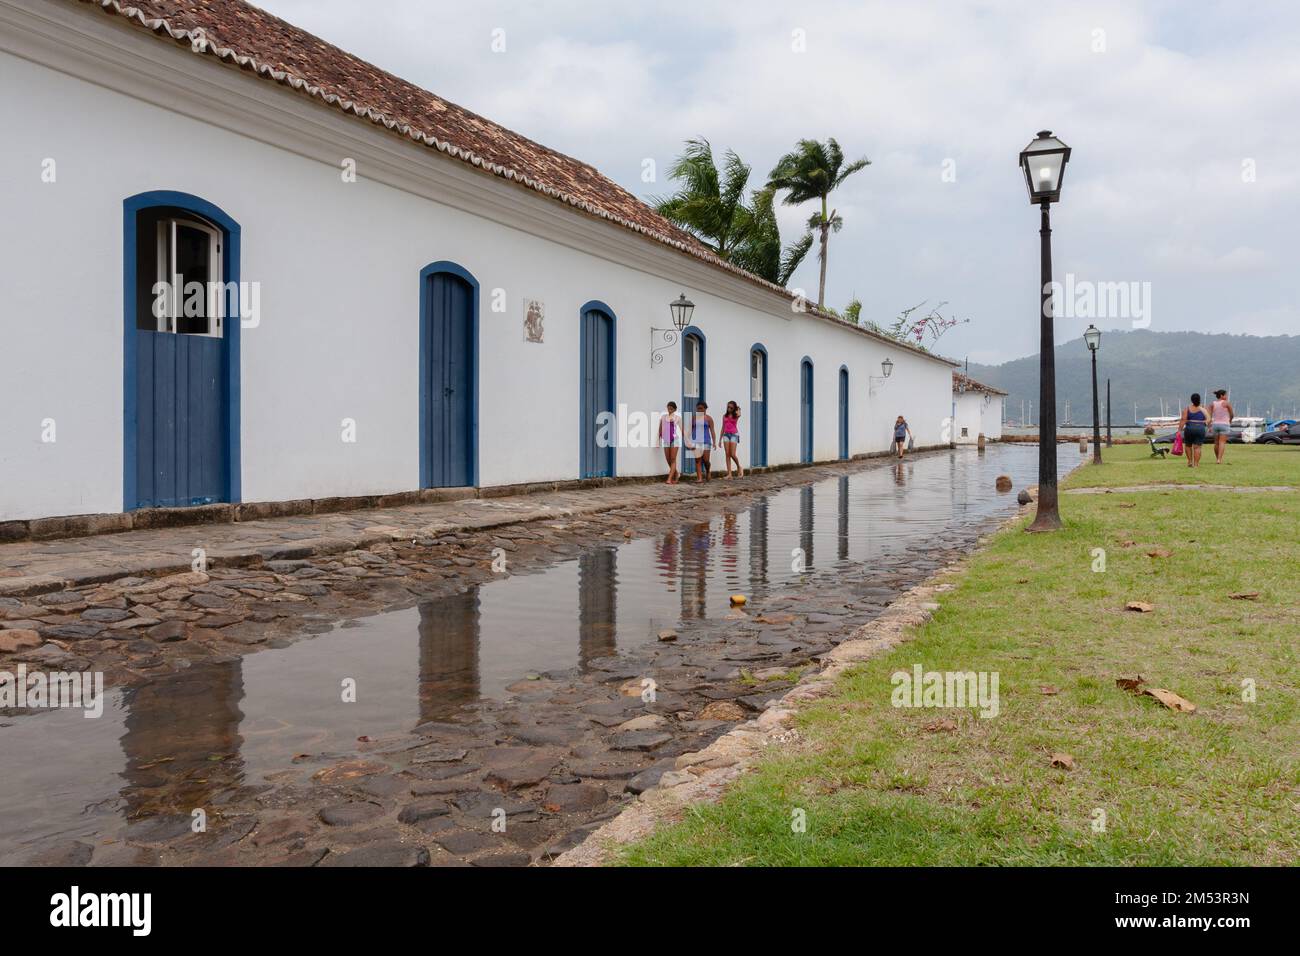 Paraty, RJ, Brazil. 27 December, 2012. A general view shows historic buildings and cobblestone paved streets flooded by incoming tide in the Historic Center District of Paraty, Rio de Janeiro, Brazil. The historic center of Paraty, were inscribed on UNESCO World Heritage List in 2019 under the title 'Paraty and Ilha Grande'. Stock Photo